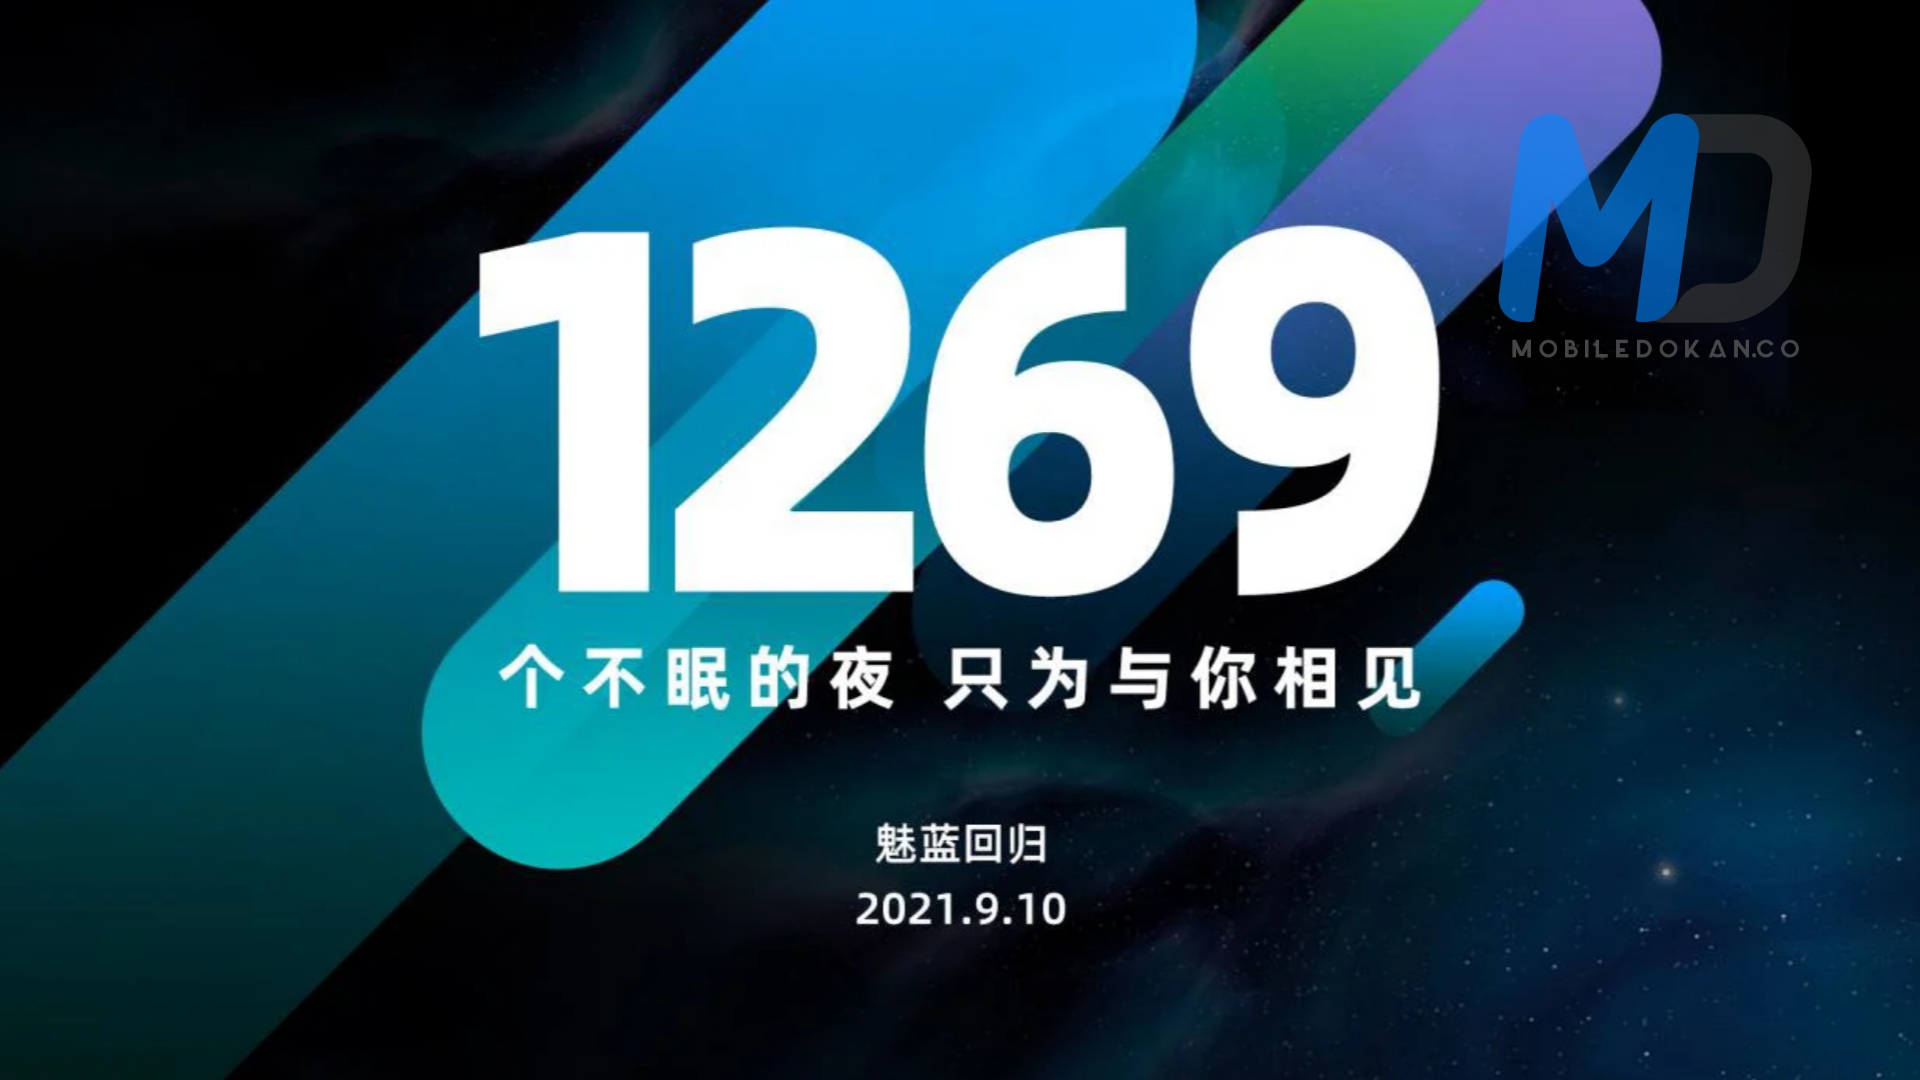 Meizu Blue Charm brand officially announces return after 1269 days